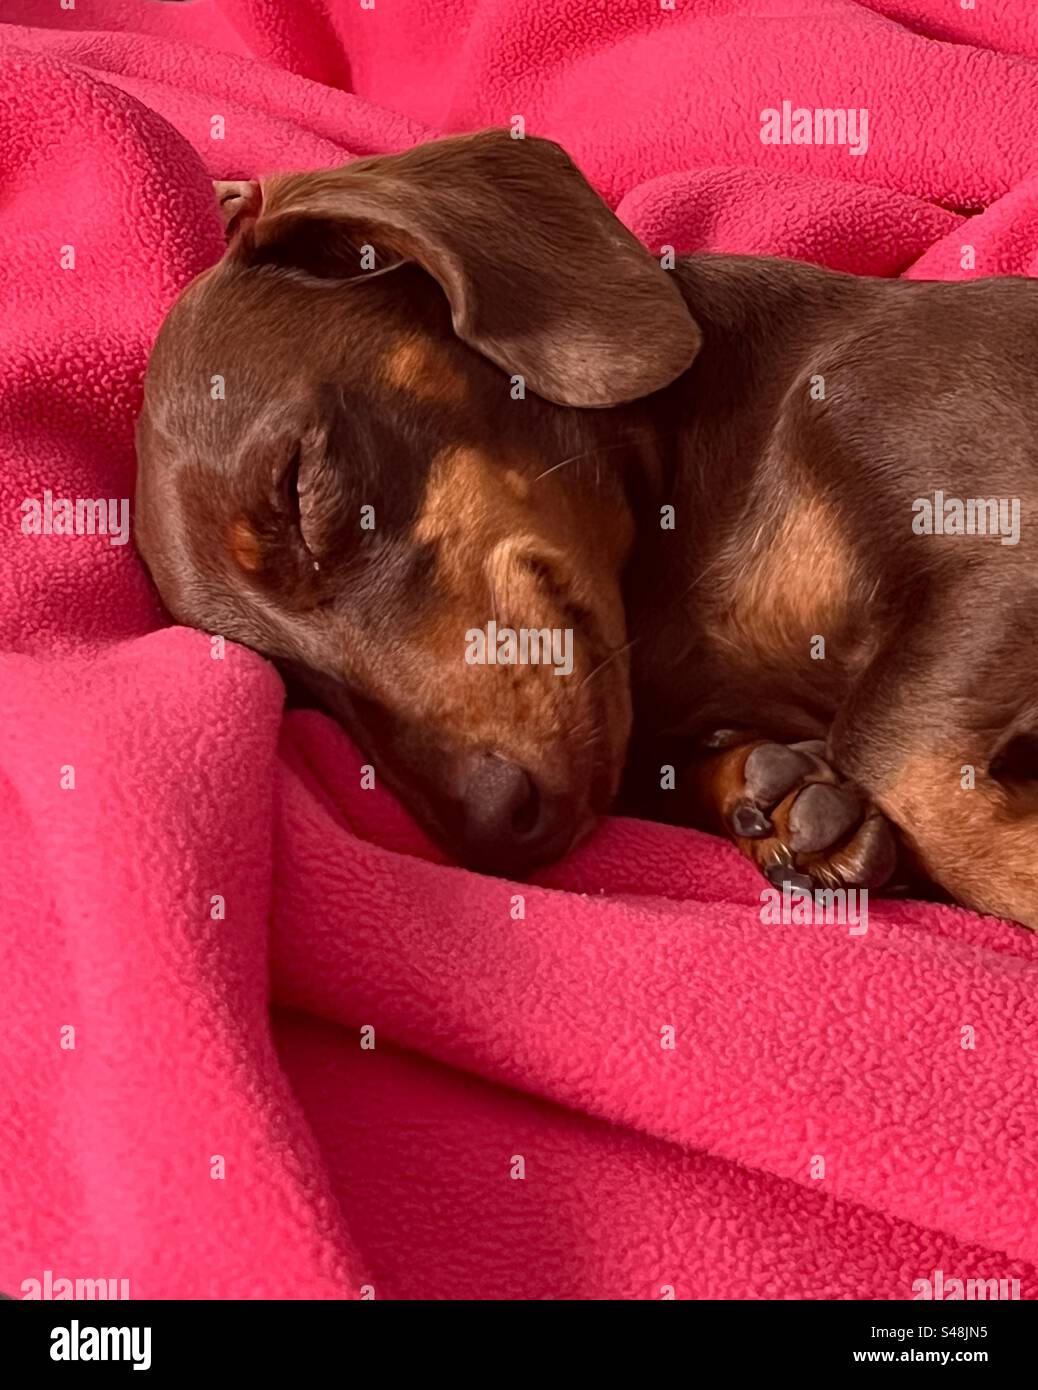 Sleeping miniature dachshund head and front paws on bright pink blanket Stock Photo